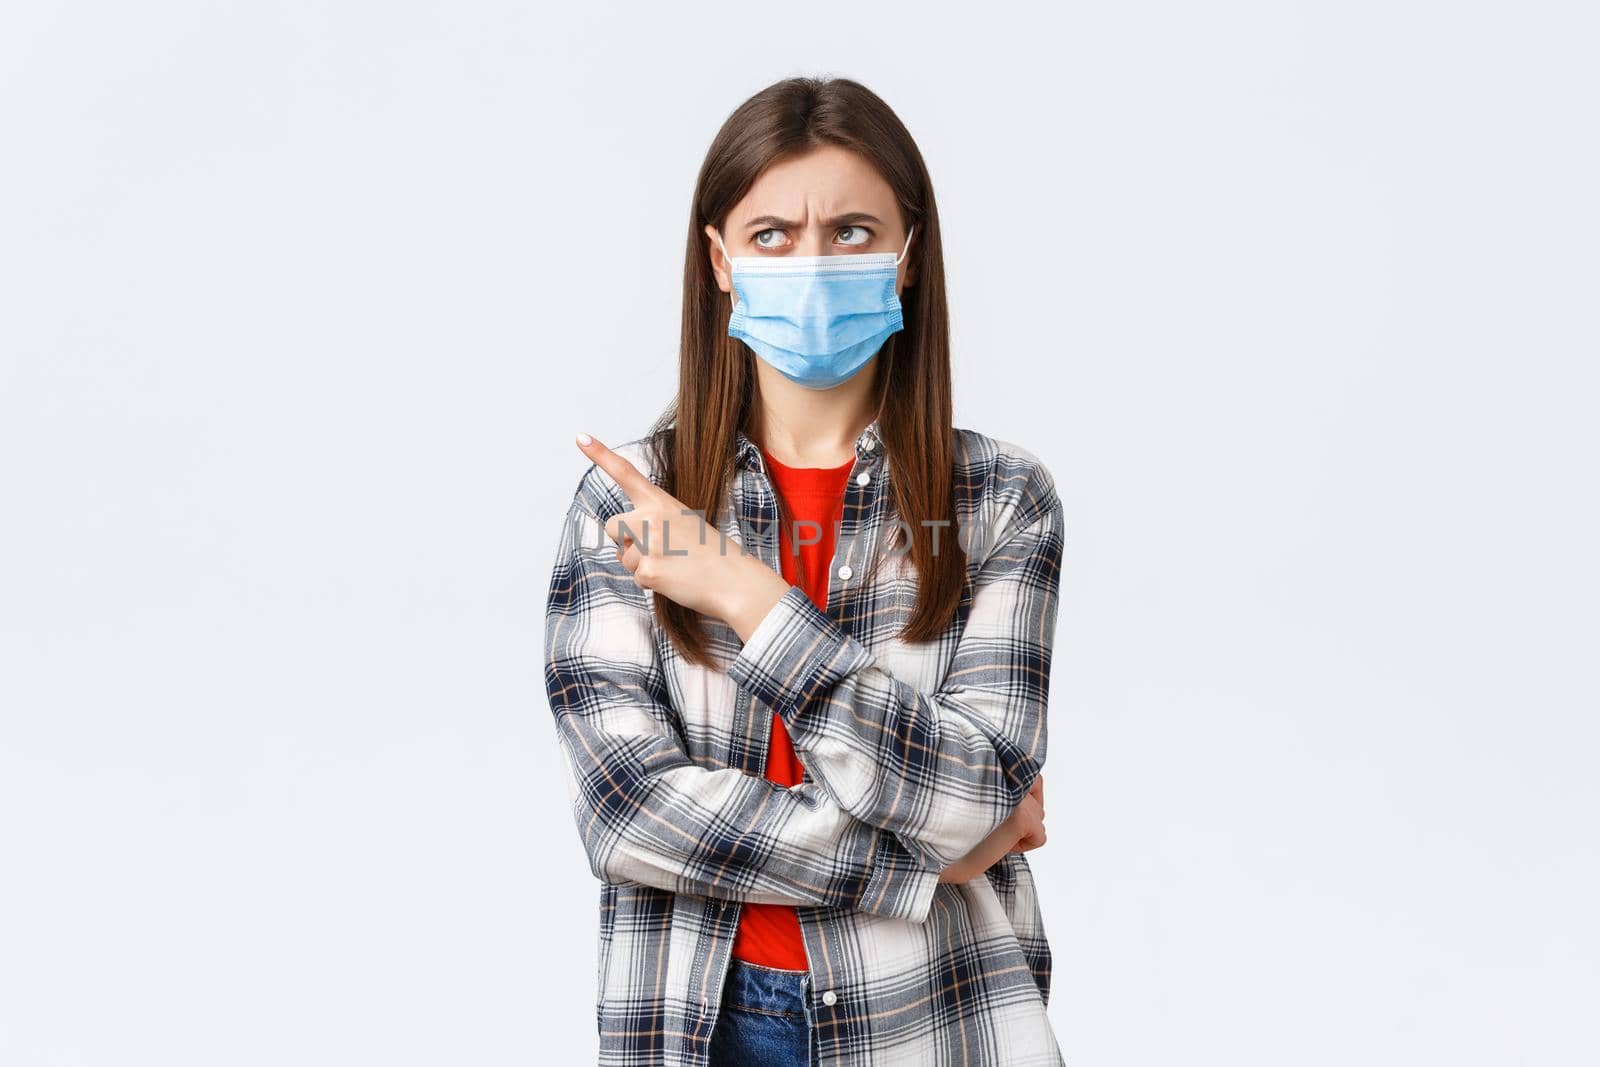 Coronavirus outbreak, leisure on quarantine, social distancing and emotions concept. Skeptical young girl express disbelief, frowning, looking and pointing upper left corner, wear medical mask.